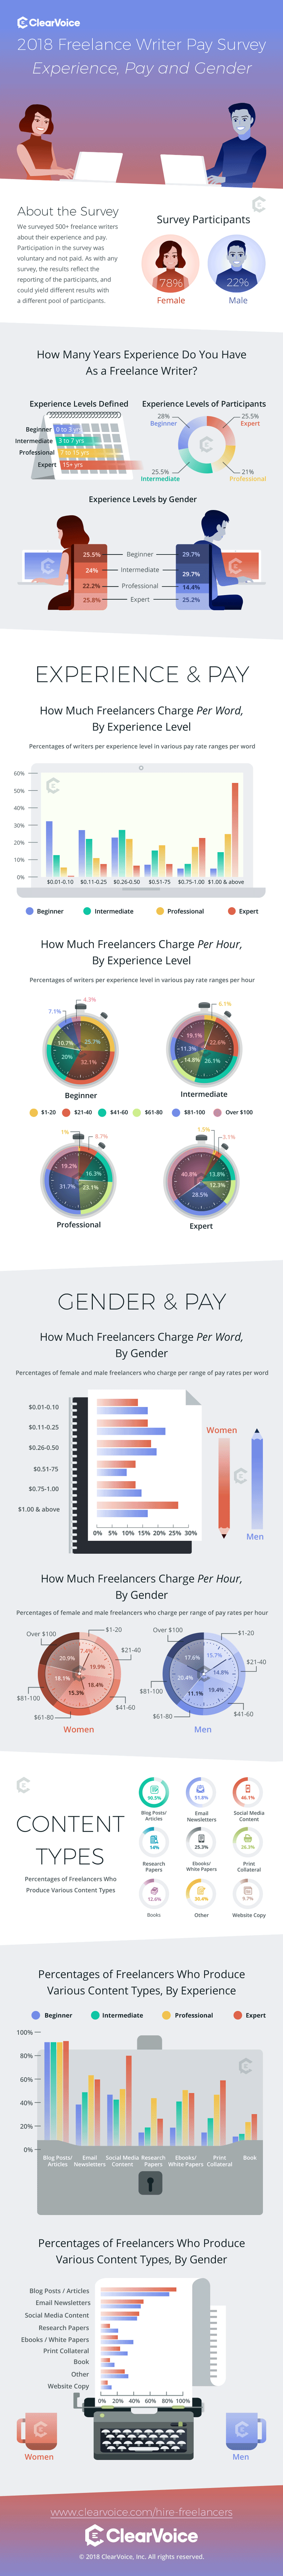 2018 Freelancer Pay Rate Survey: Experience, Pay & Gender. About the survey: We surveyed 500+ freelance writers about their experience and pay. Participation in the survey was voluntary and not paid. As with any survey, the results reflect the reporting of the participants and could yield different results with a different pool of candidates. Survey participants were 78% female, 22% male. Topics include: 1) How many years experience do you have as a freelancer writer? 2) How much freelancers charge per word or per hour, by experience level? 3) How much freelance writers charge per word/hour, by gender? 4) Percentages of freelance writers who produce various content types, by experience level and by gender.